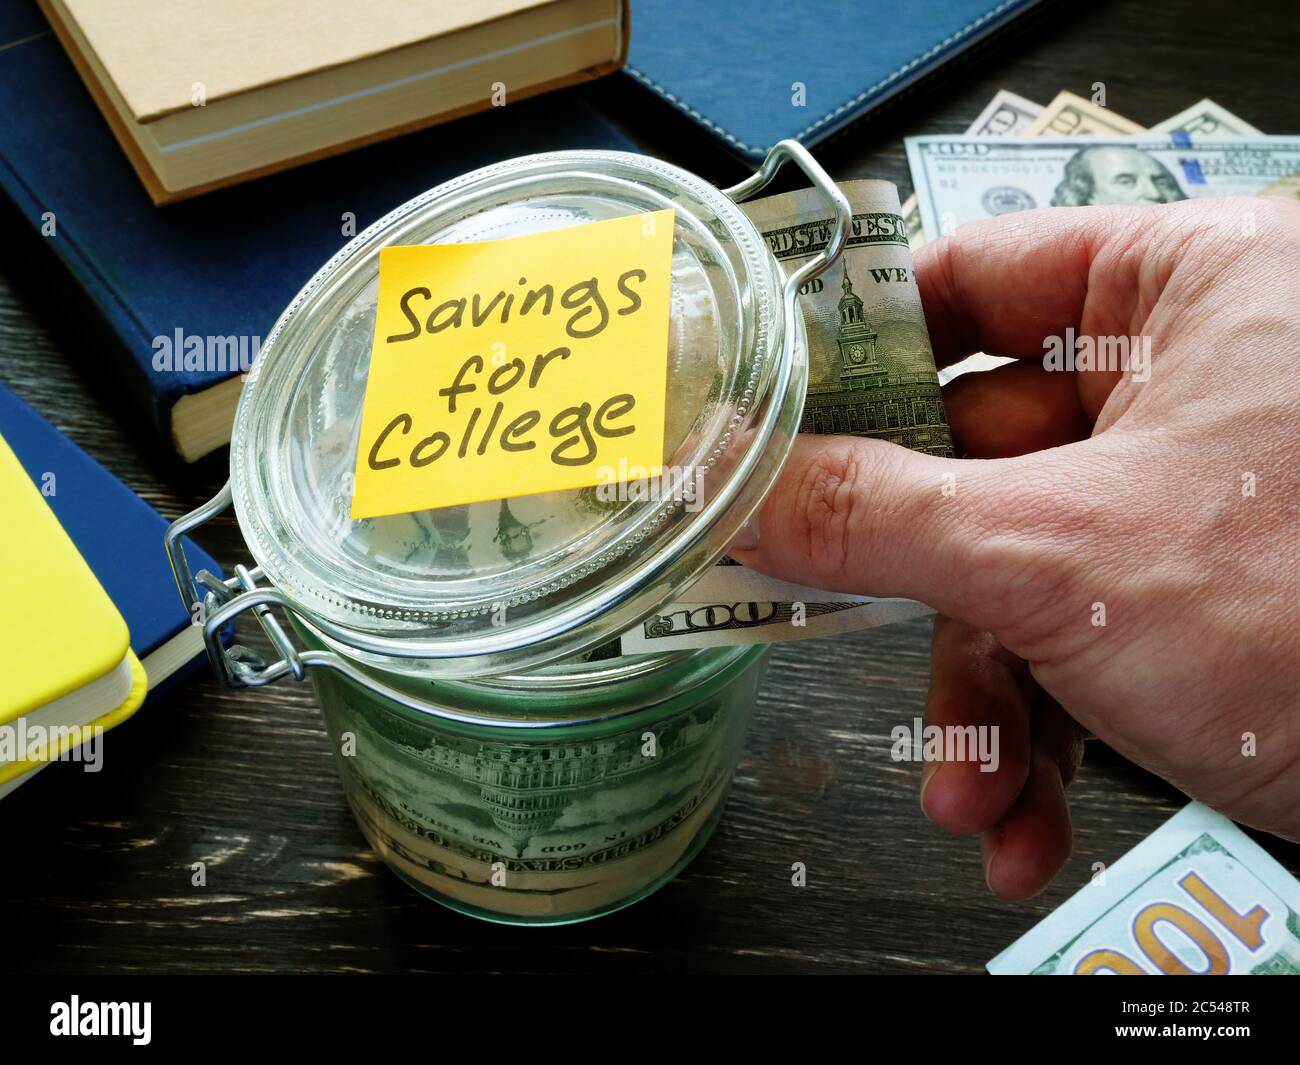 Savings for college. Hand puts money in a glass jar. Stock Photo